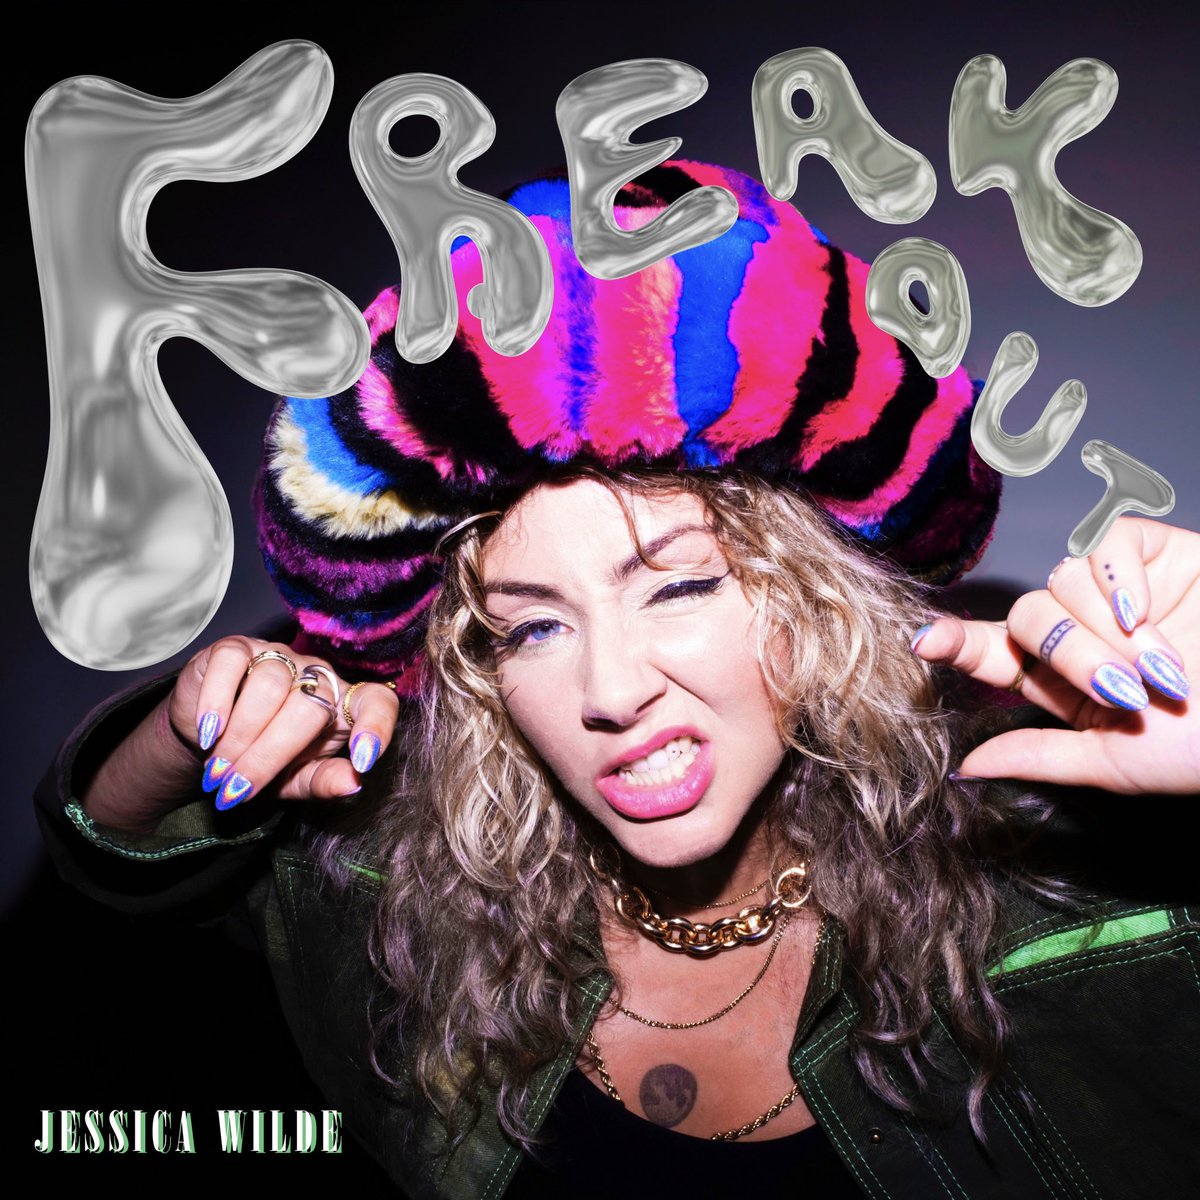 RELEASE DAY* 😝 ‘Freak Out’ has arrived! Who’s ready to freak the f*k out wi me!??? 😝 slinky.to/FreakOut And lock in to @BBCRadioLondon tonight to hear me chatting to @kimdarealist @queen_raffaella all things music and hear ‘Freak Out’ spun liiive! 💕💕💕